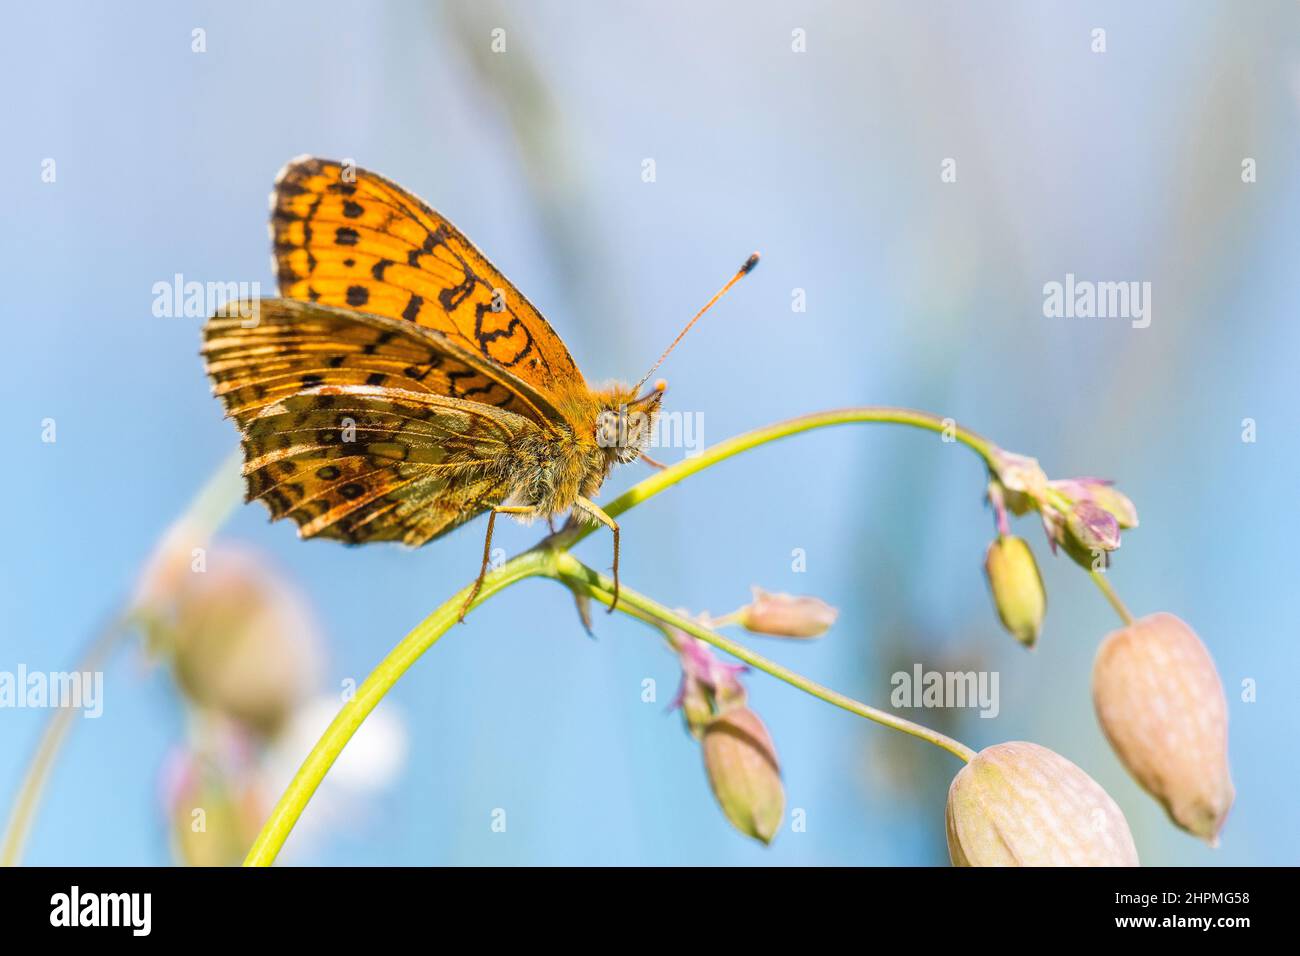 Lesser marbled fritillary (Brenthis ino). Stock Photo